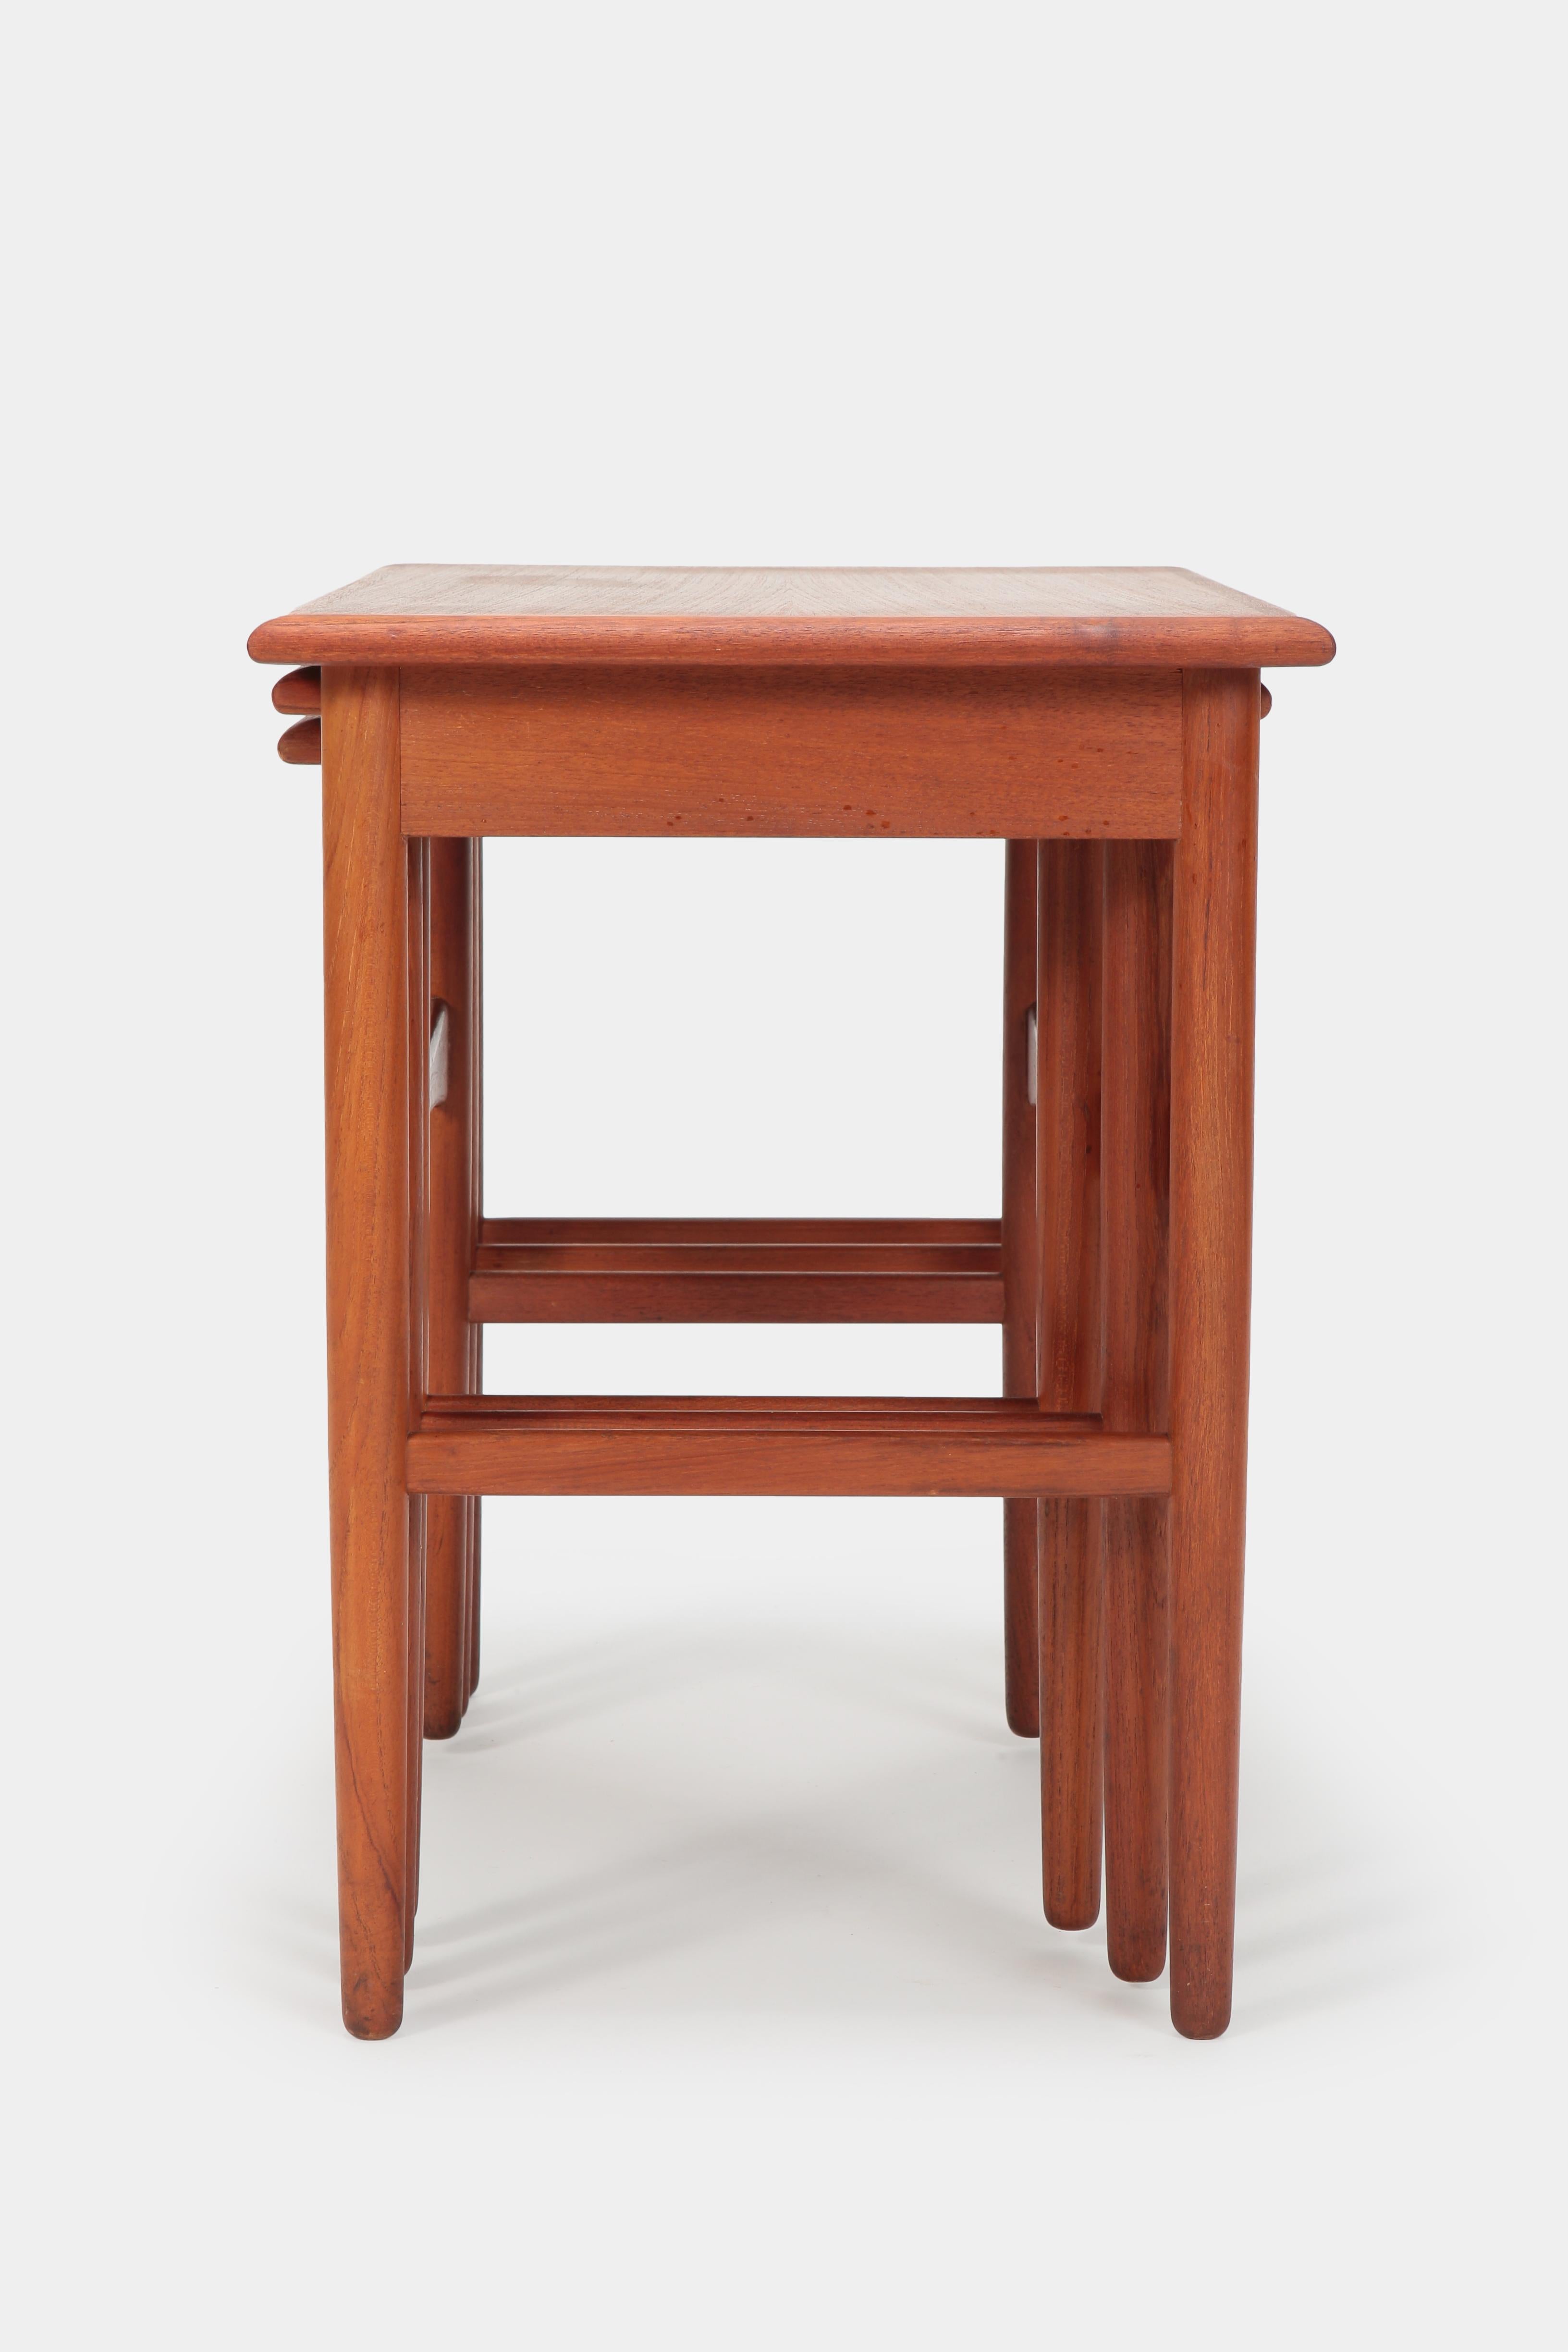 Kai Kristiansen Nesting Tables MH Møbler, 1960s In Good Condition For Sale In Basel, CH